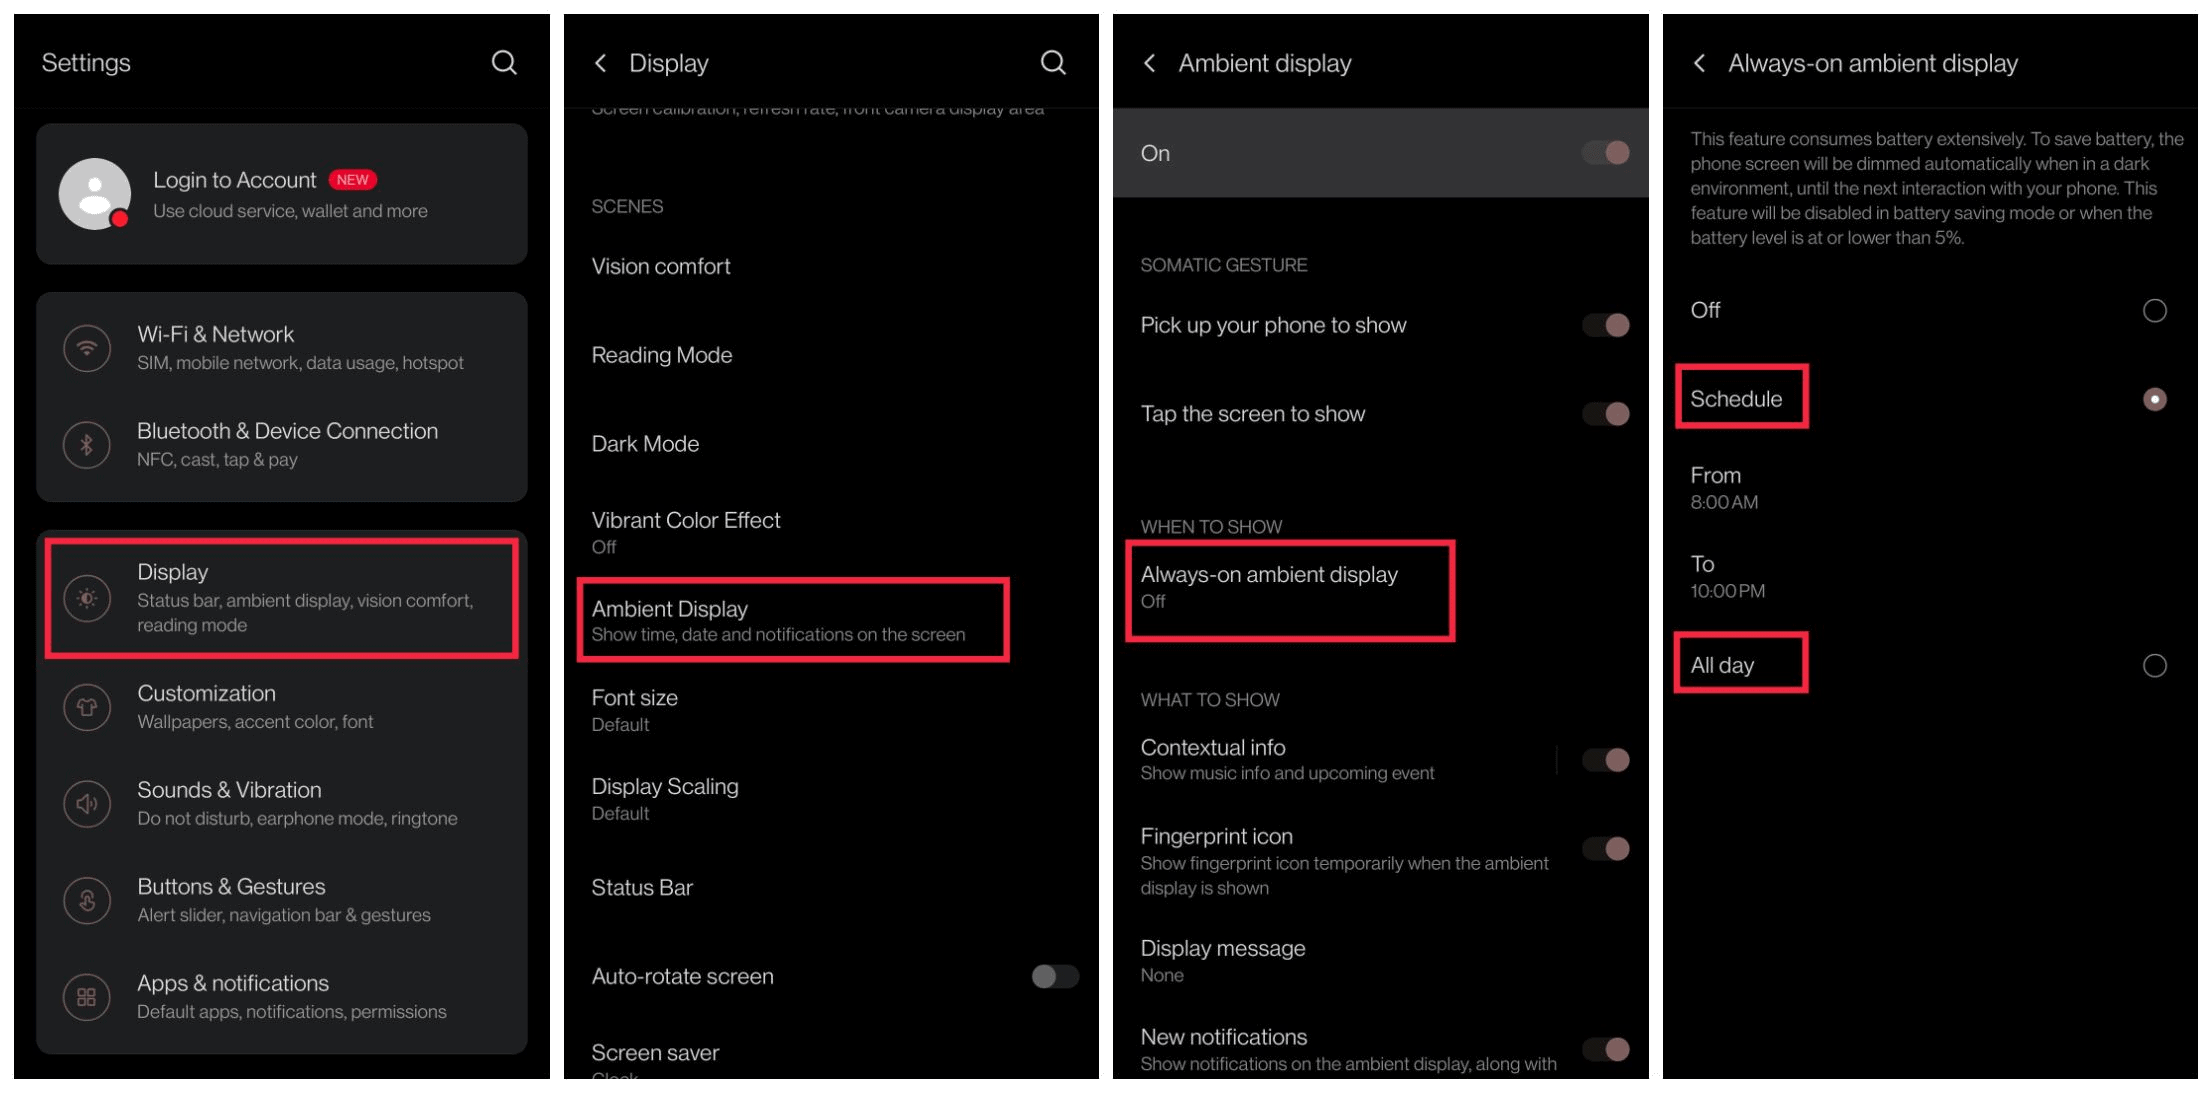 Download OnePlus Canvas AOD style for OnePlus 8 Series with OxygenOS 11 Beta - Check this out